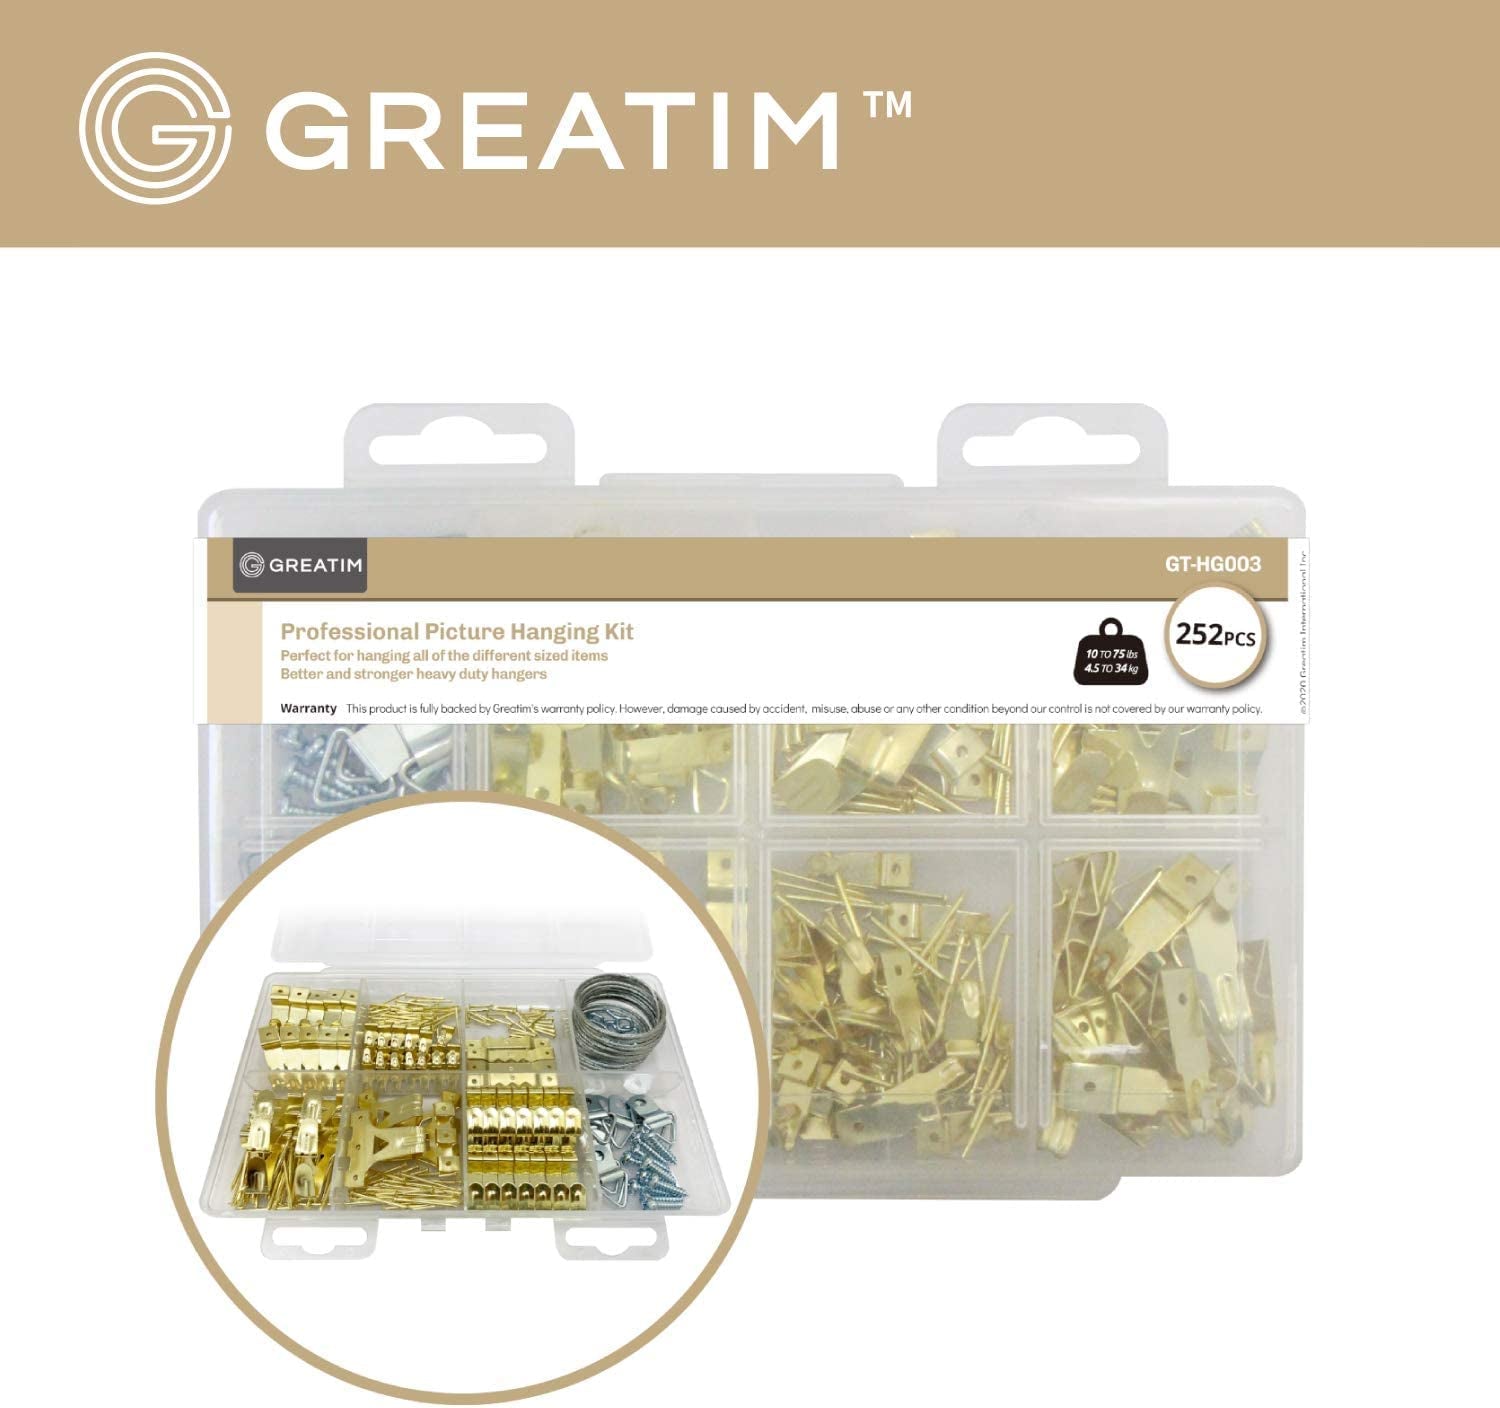 G GREATIM, Greatim GT-HG003 Heavy Duty Hanging Kit, Picture Hangers, Picture Hanging Wire, 252Pcs, Supports 10 to 75 Lbs